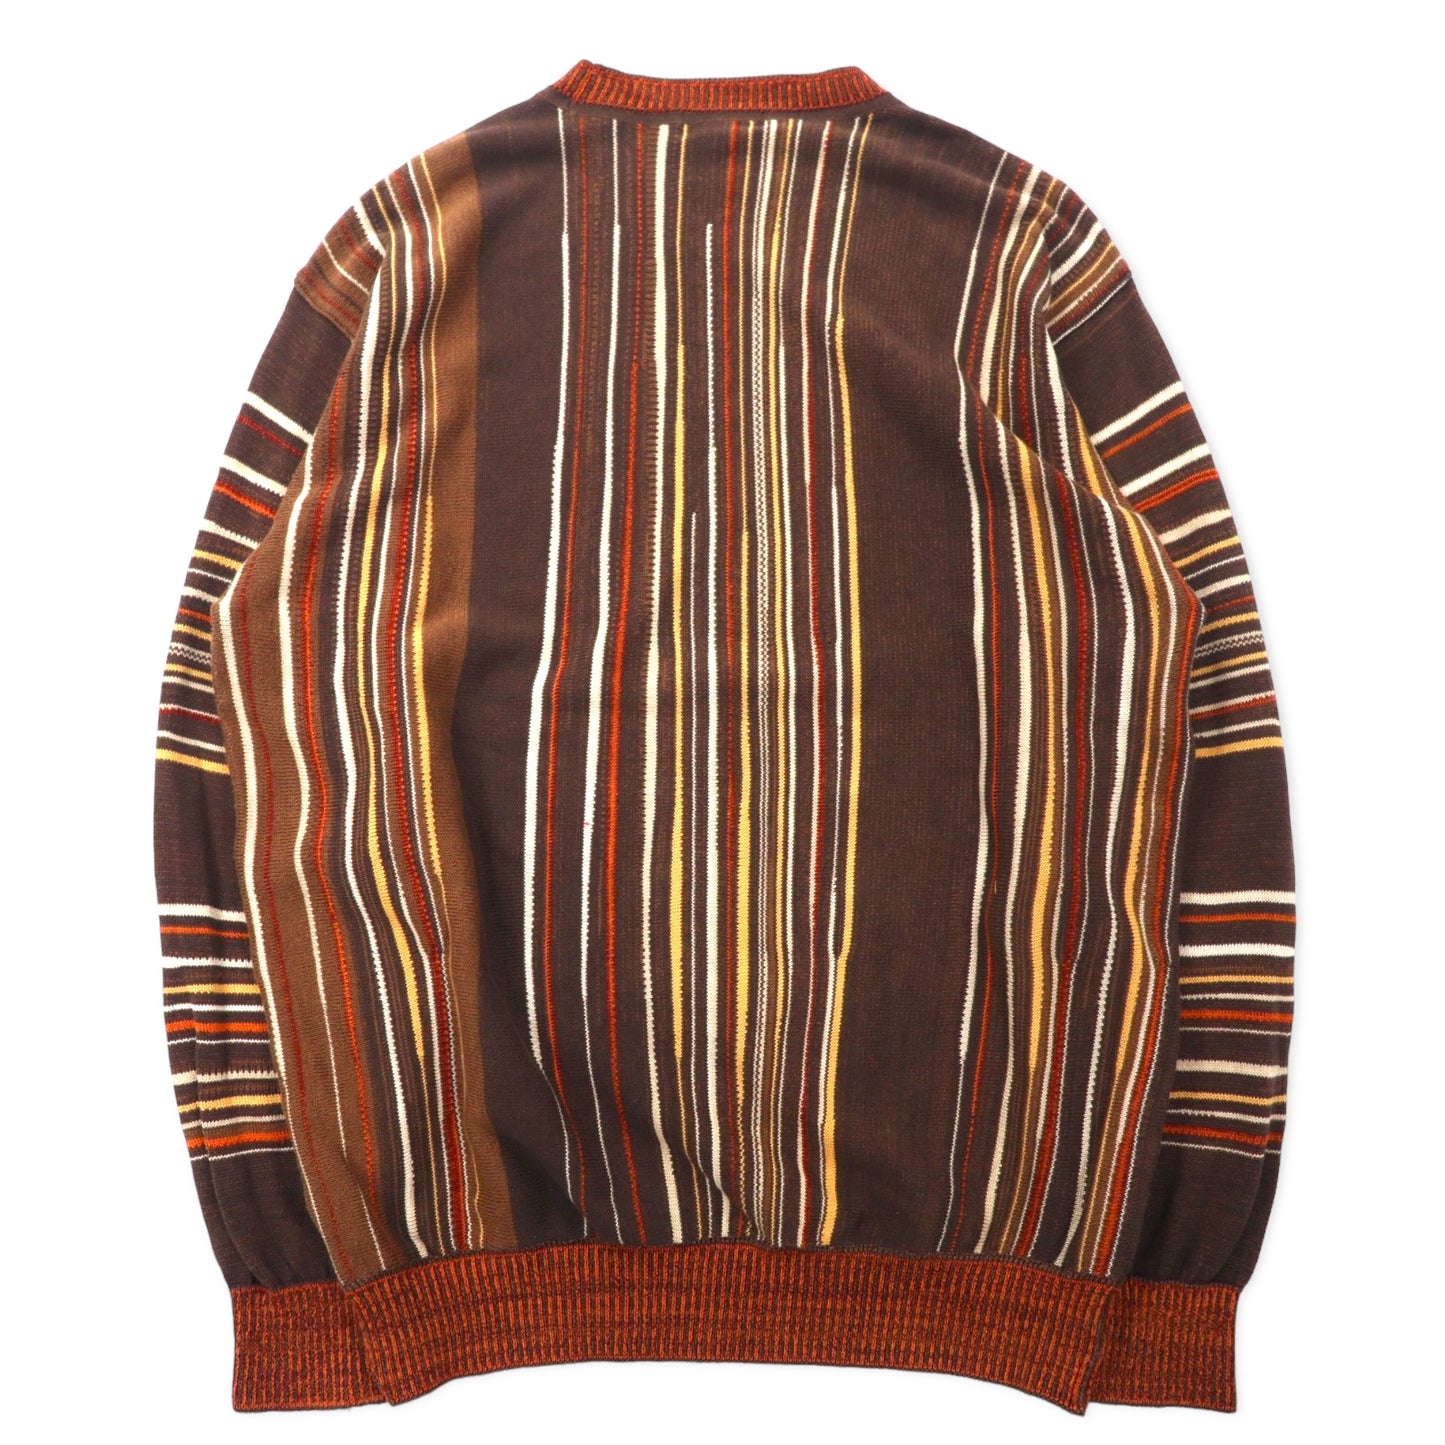 KENZO GOLF 90's Patterned Knit Sweater 3 Brown Cotton One Point 